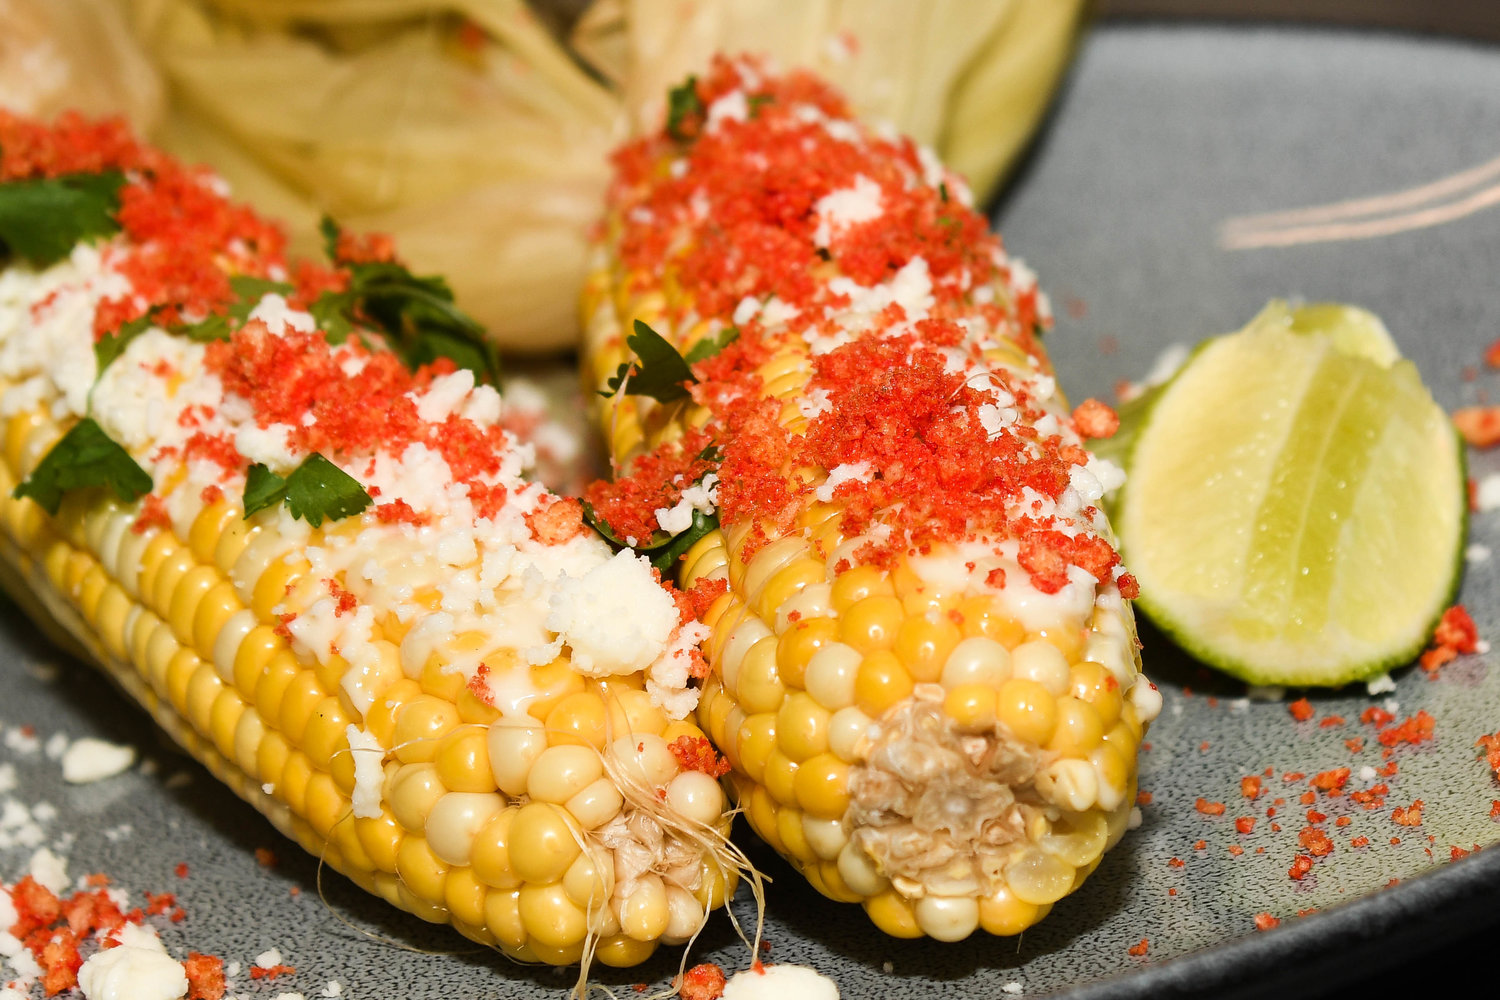 Street corn is one of many different appetizer options at Utica BBQ on Friday, Nov. 11.